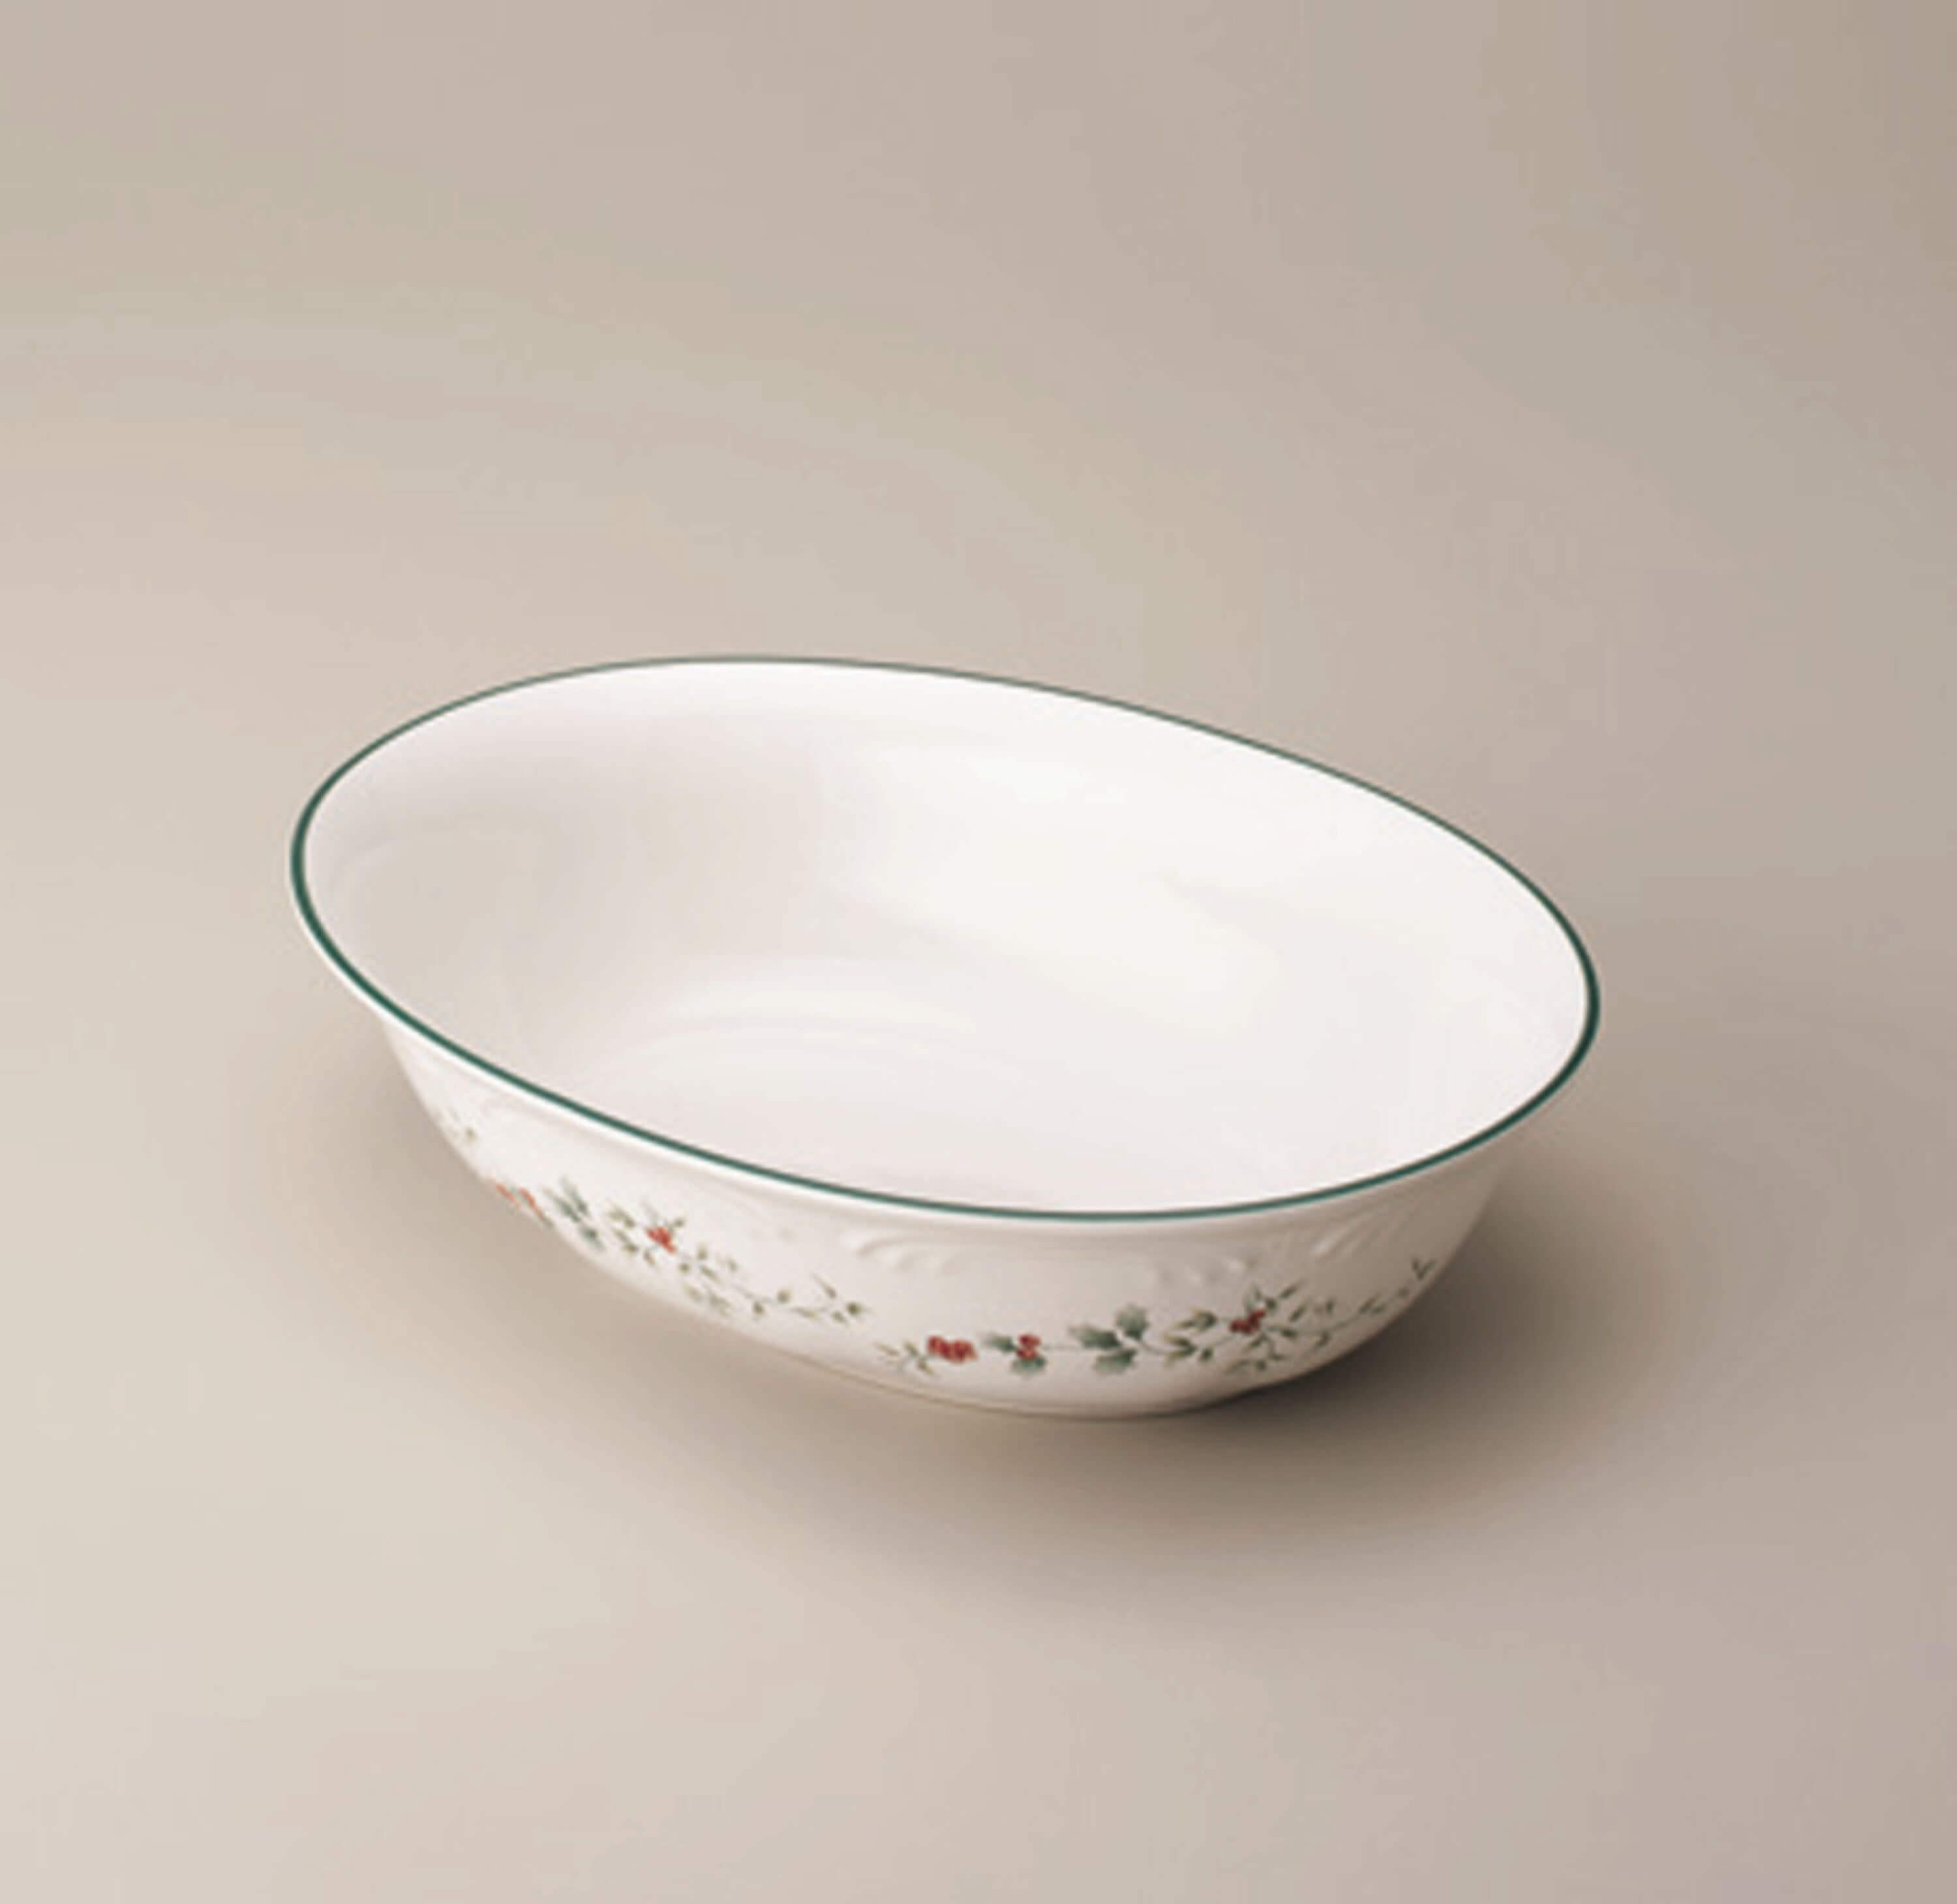 Pfaltzgraff Winterberry Divided Oval Vegetable Bowl